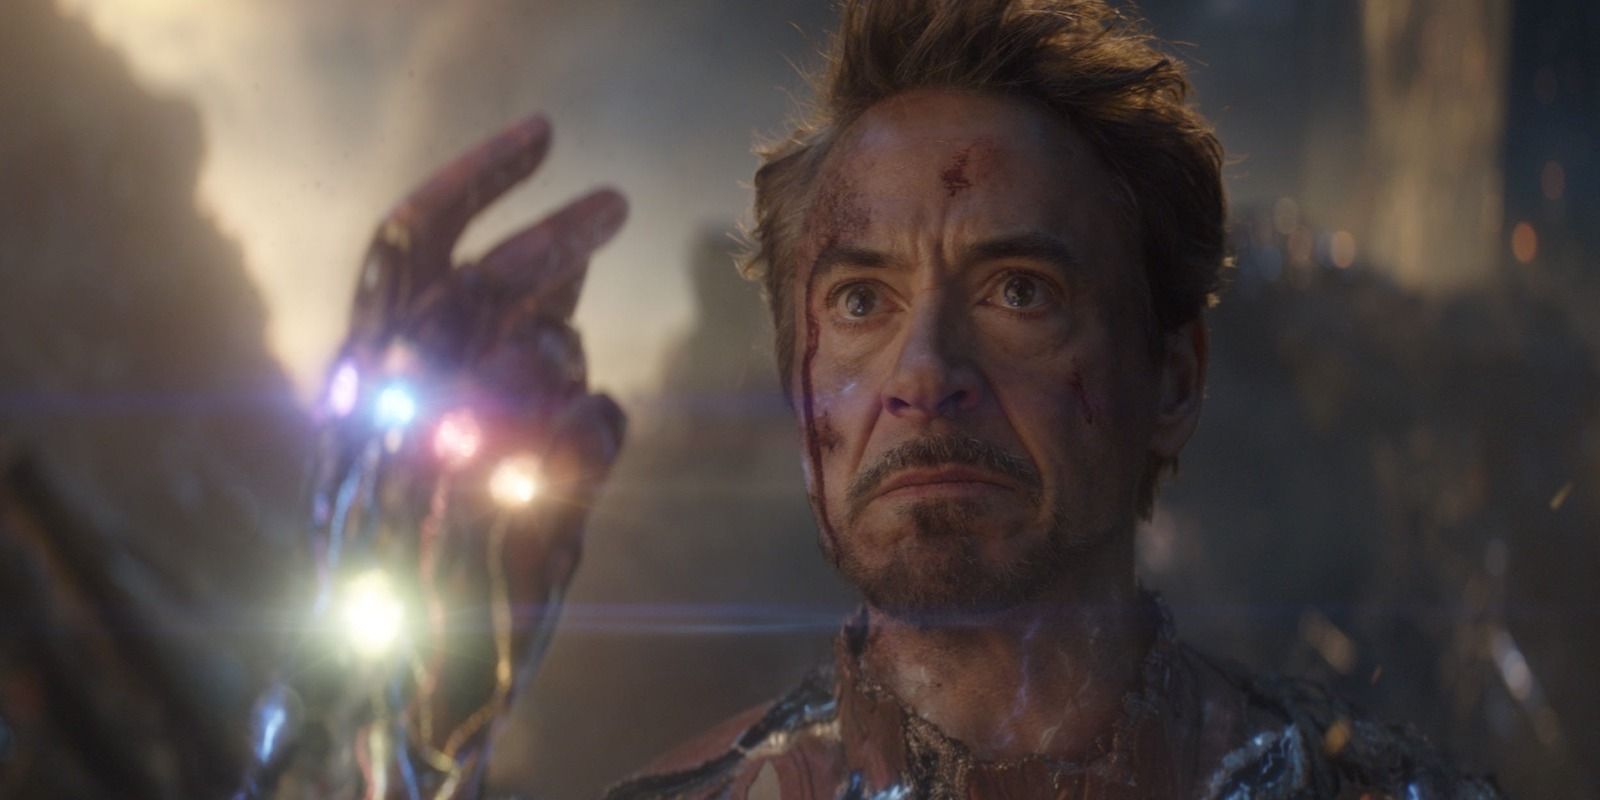 Iron Man snapping his fingers in Avengers Endgame